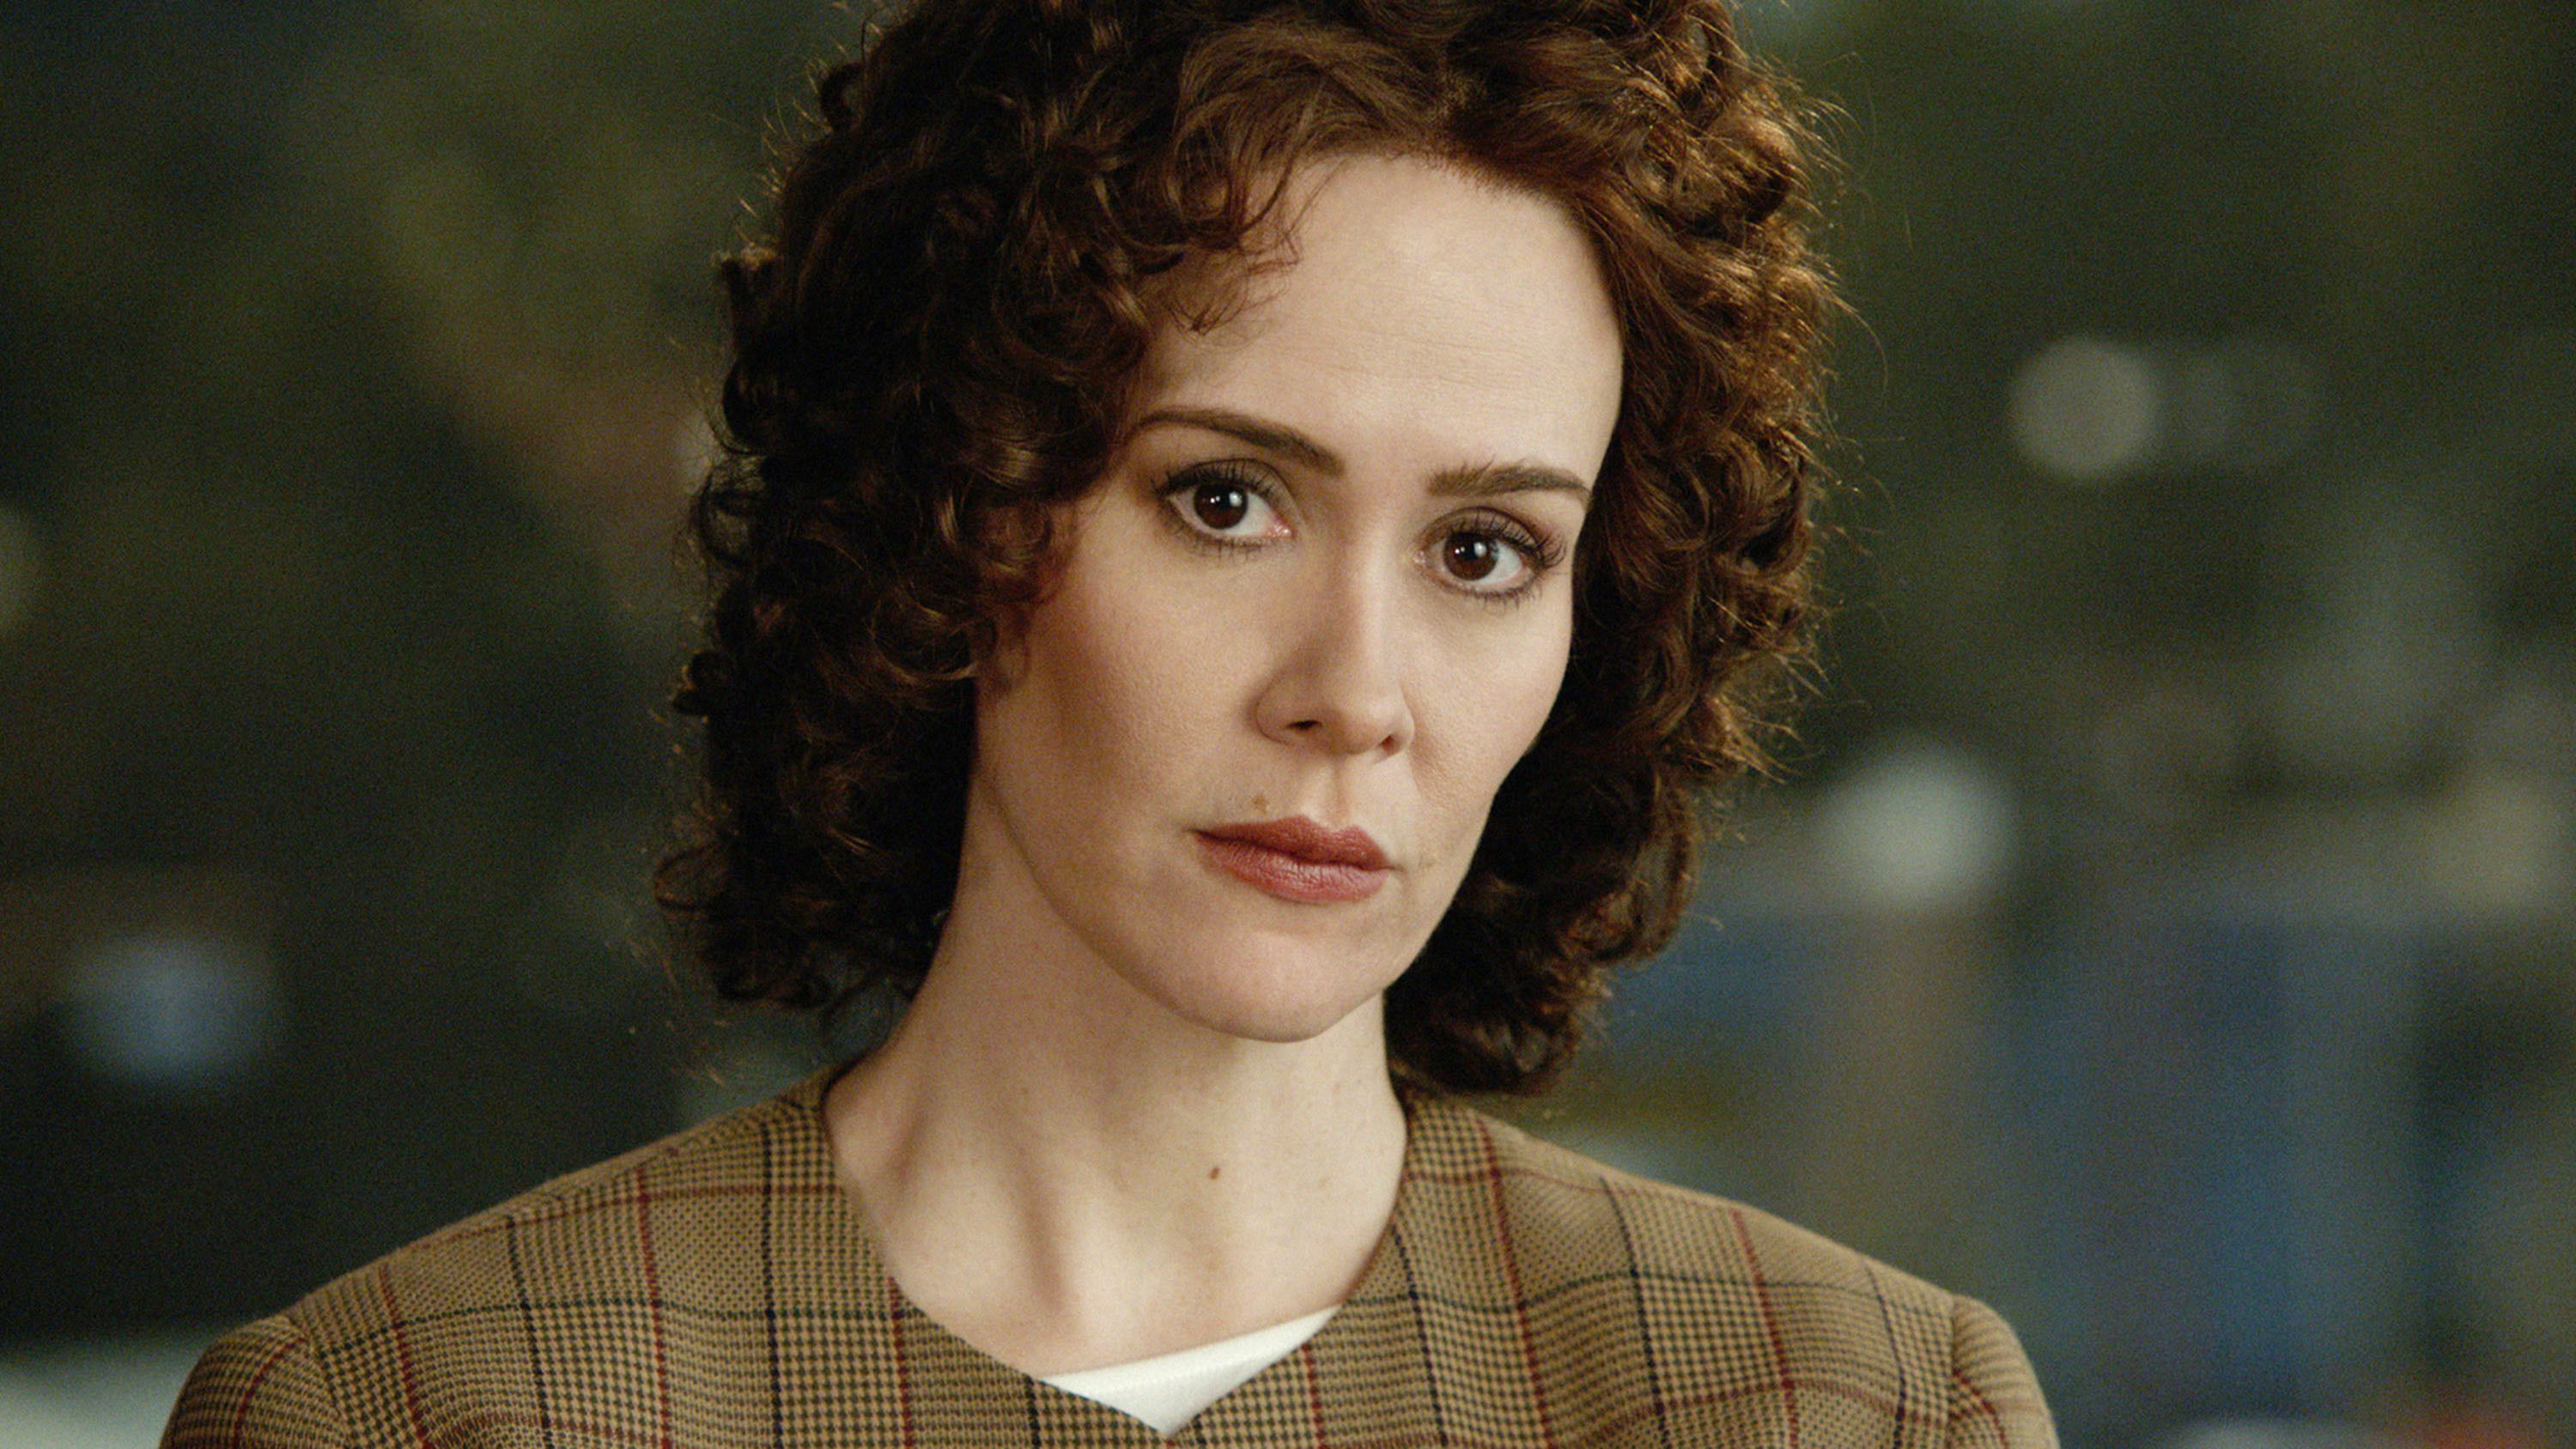 Sarah Paulson in The People v. O.J. Simpson: American Crime Story